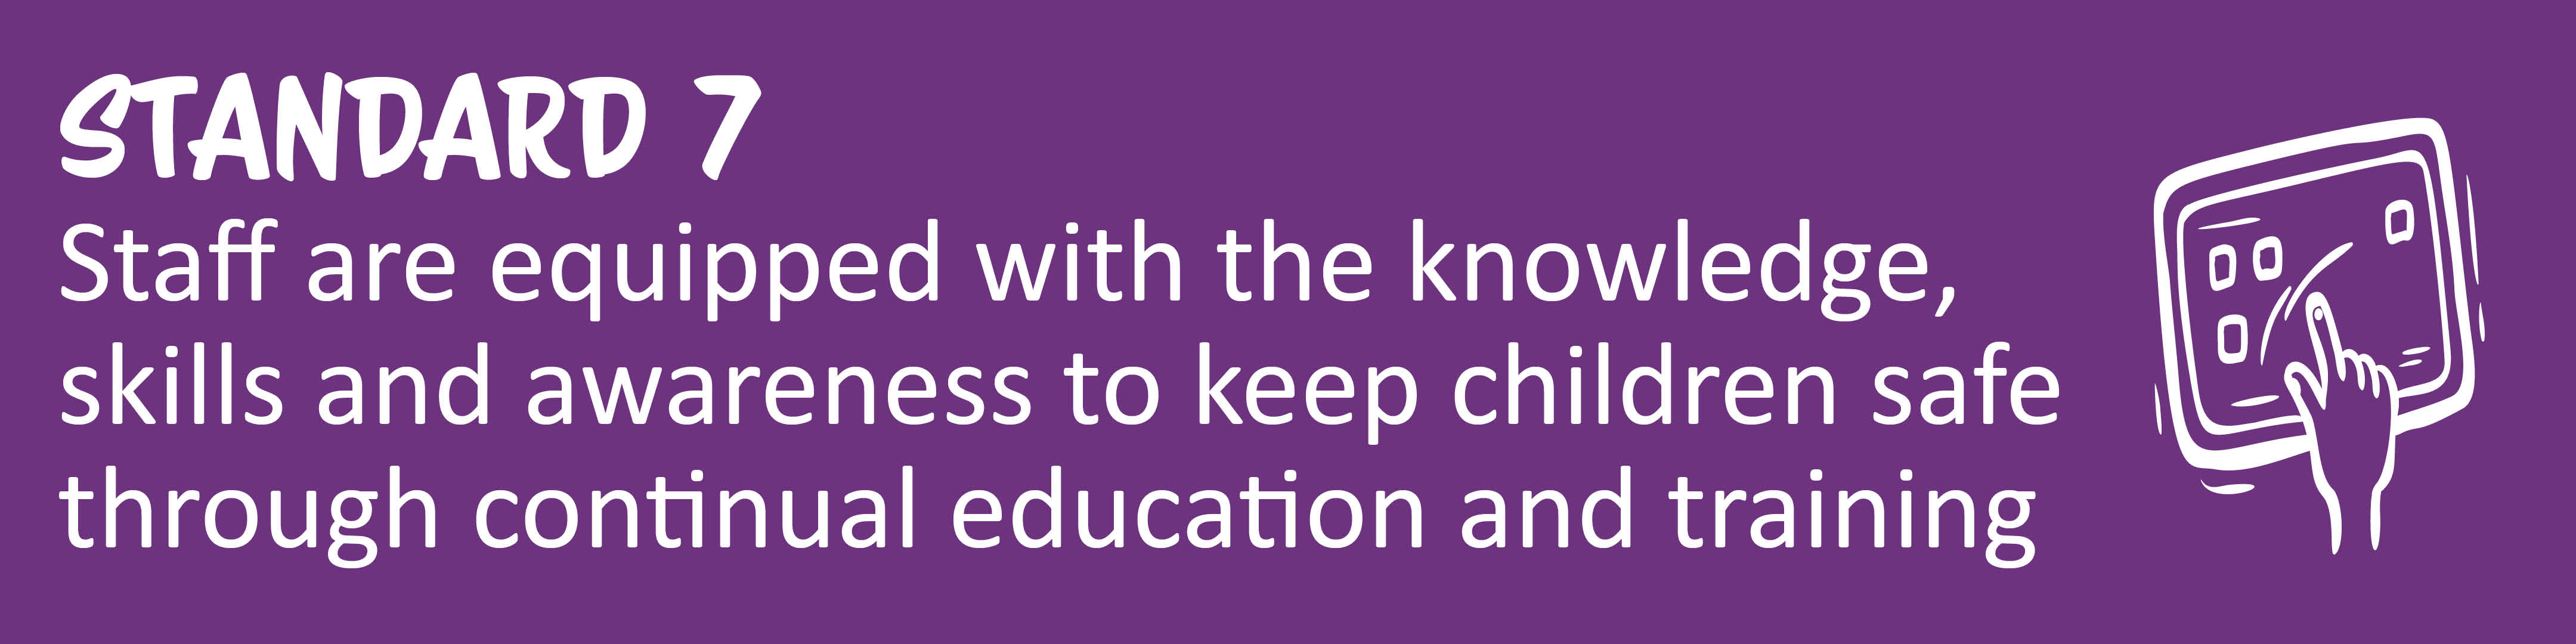 Child Safe Standard 7: Staff feel equipped with the knowledge, skills and awareness to keep children safe through continual education and training